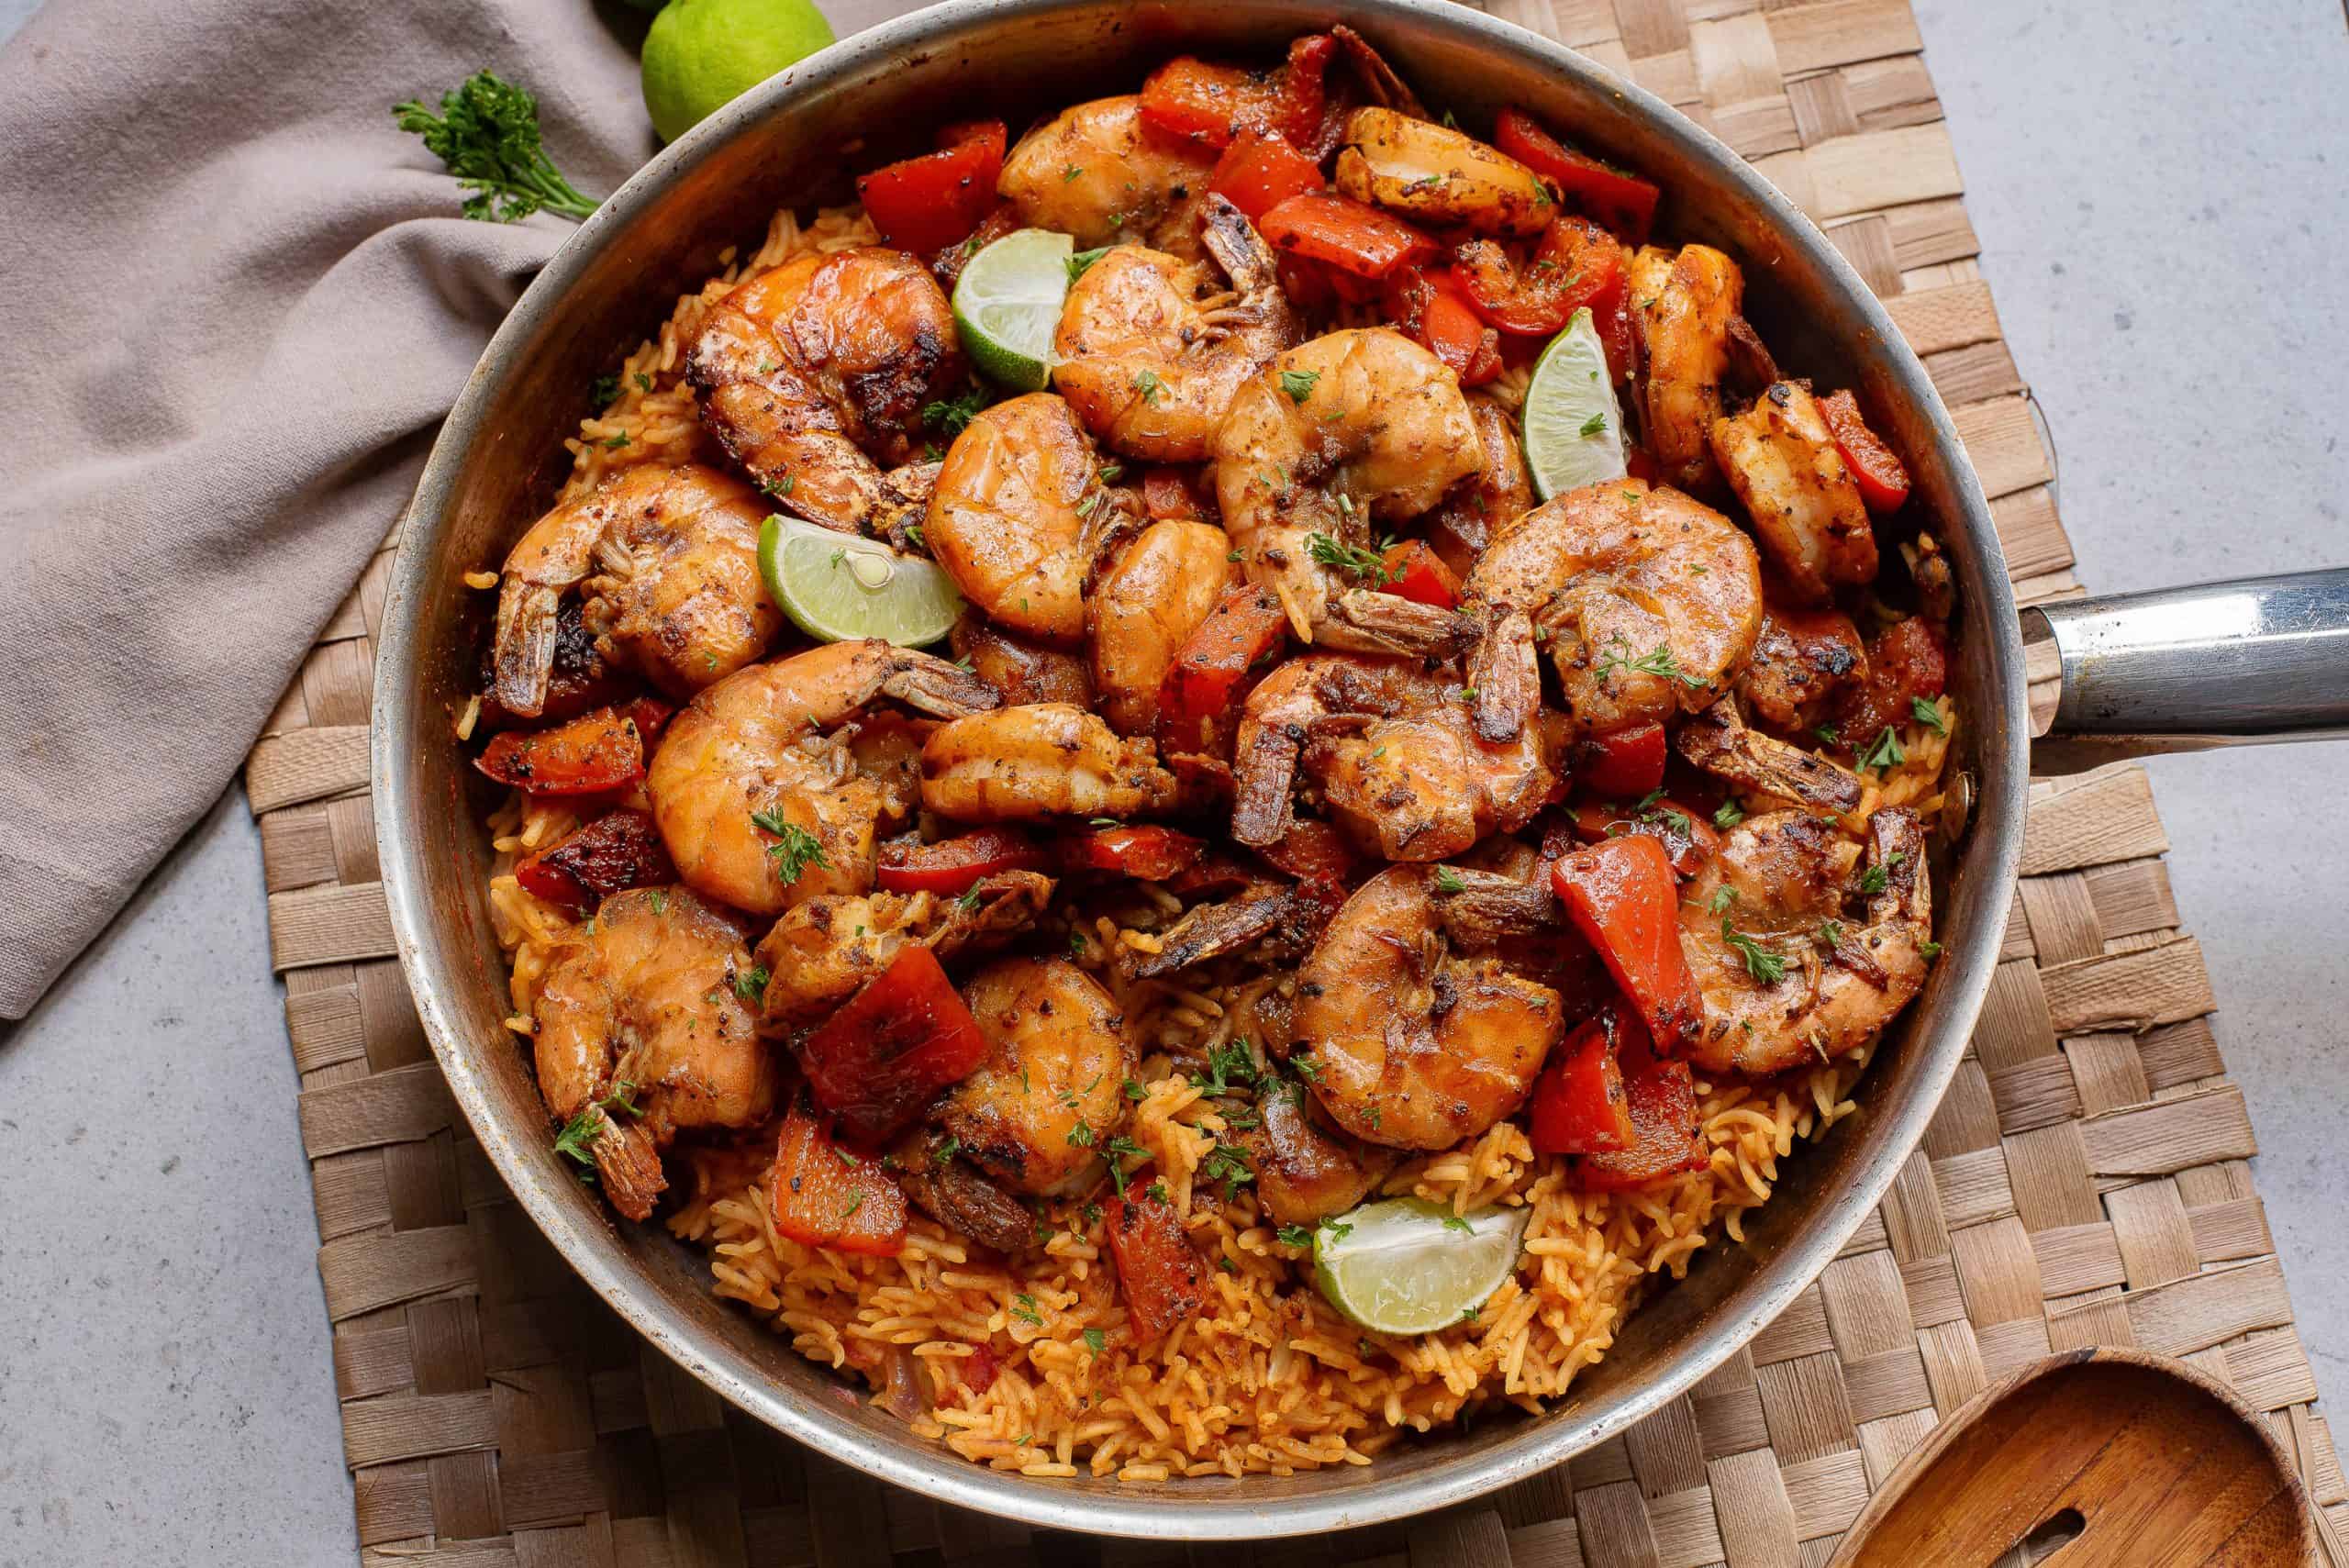 Shrimp and rice in a skillet.